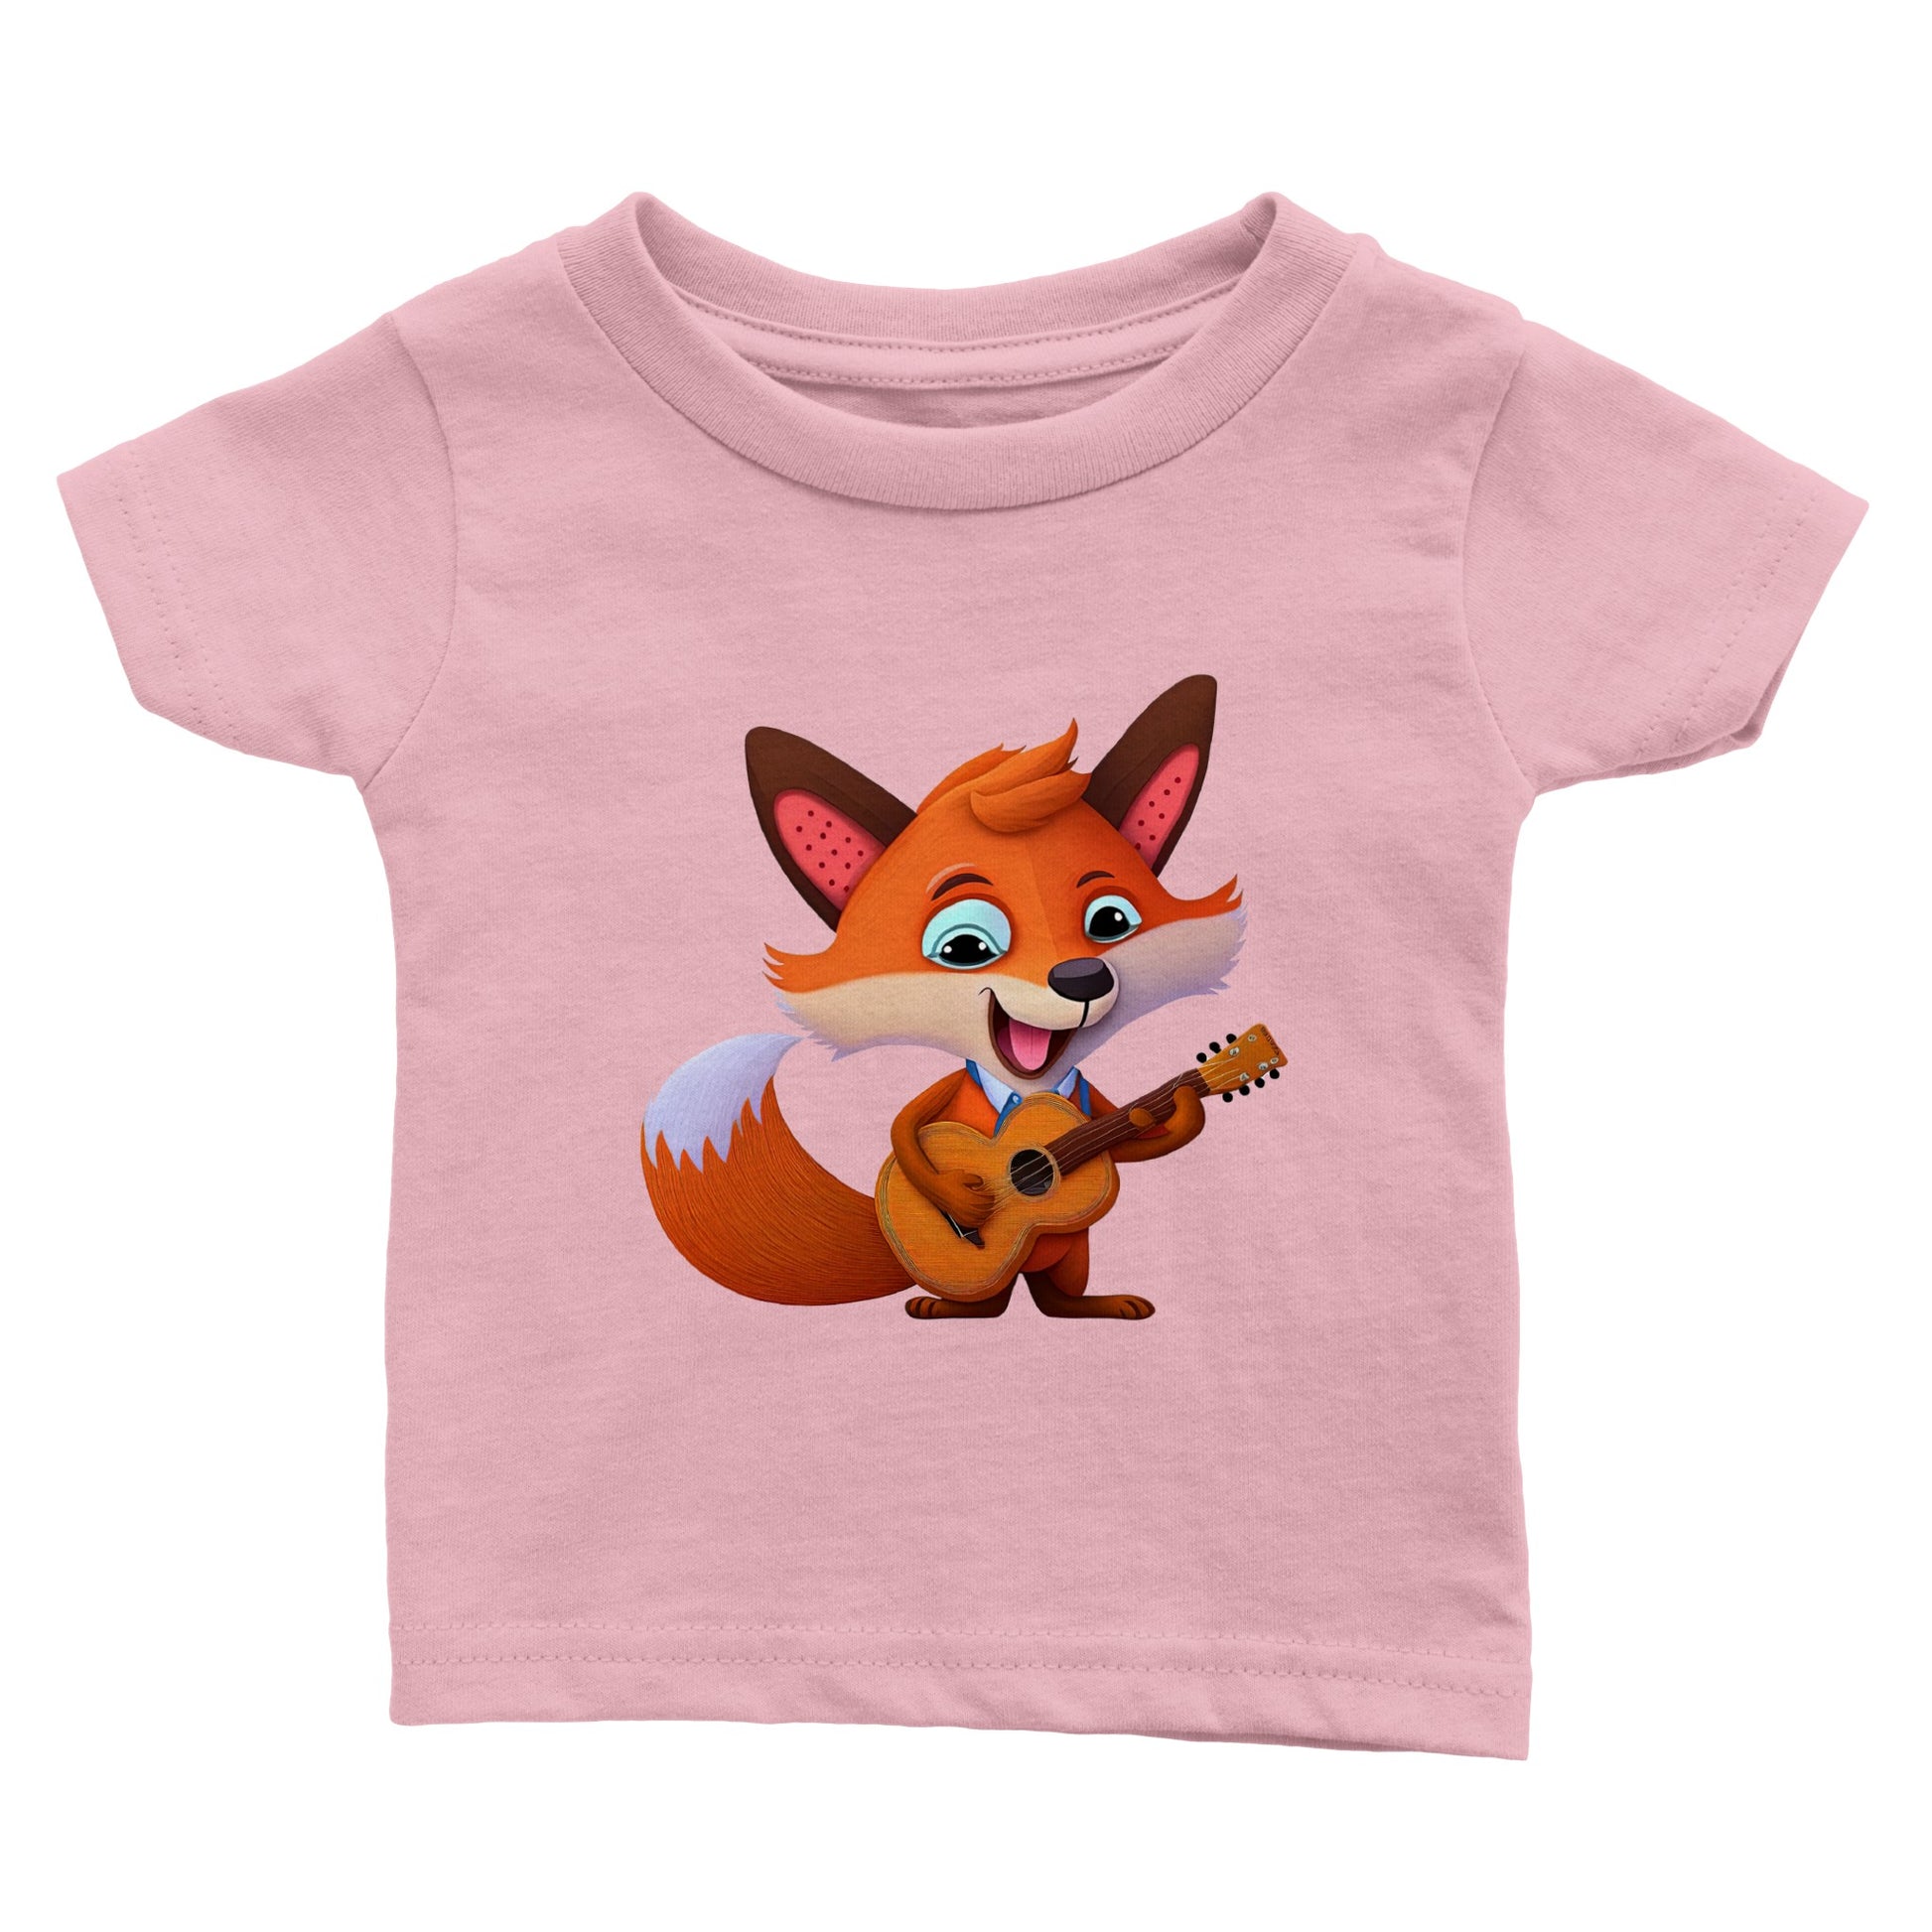 Babies pink t-shirt with cute fox playing a guitar